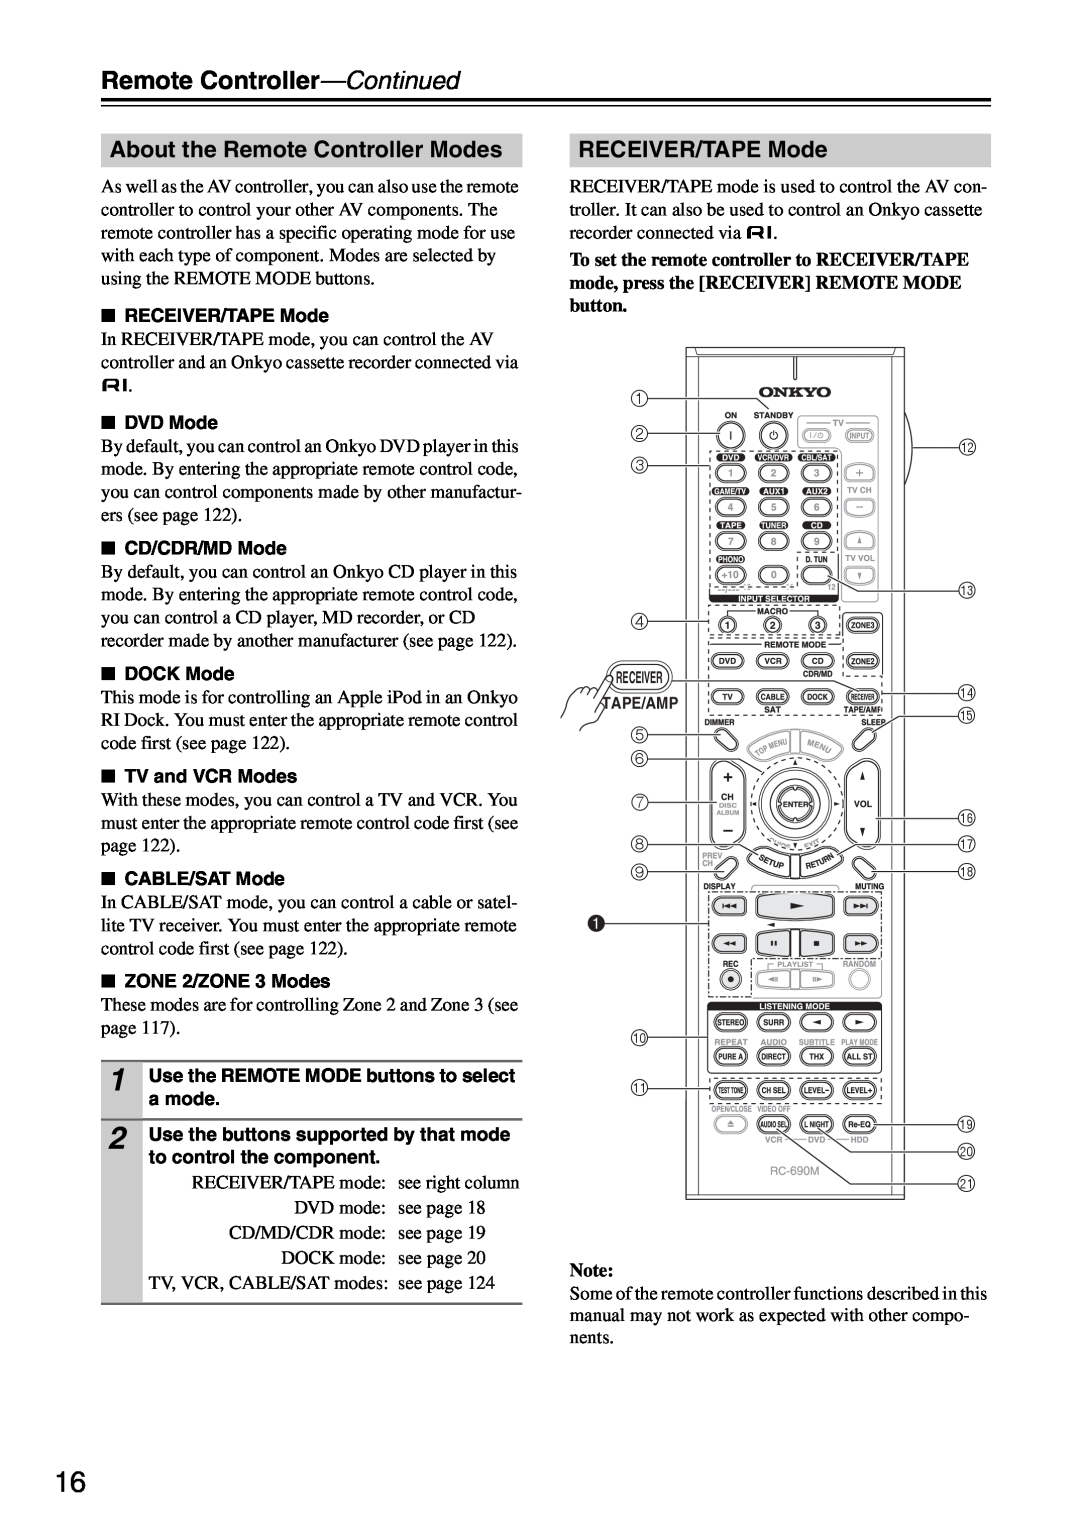 Onkyo PR-SC886 instruction manual Remote Controller—Continued, About the Remote Controller Modes, RECEIVER/TAPE Mode 